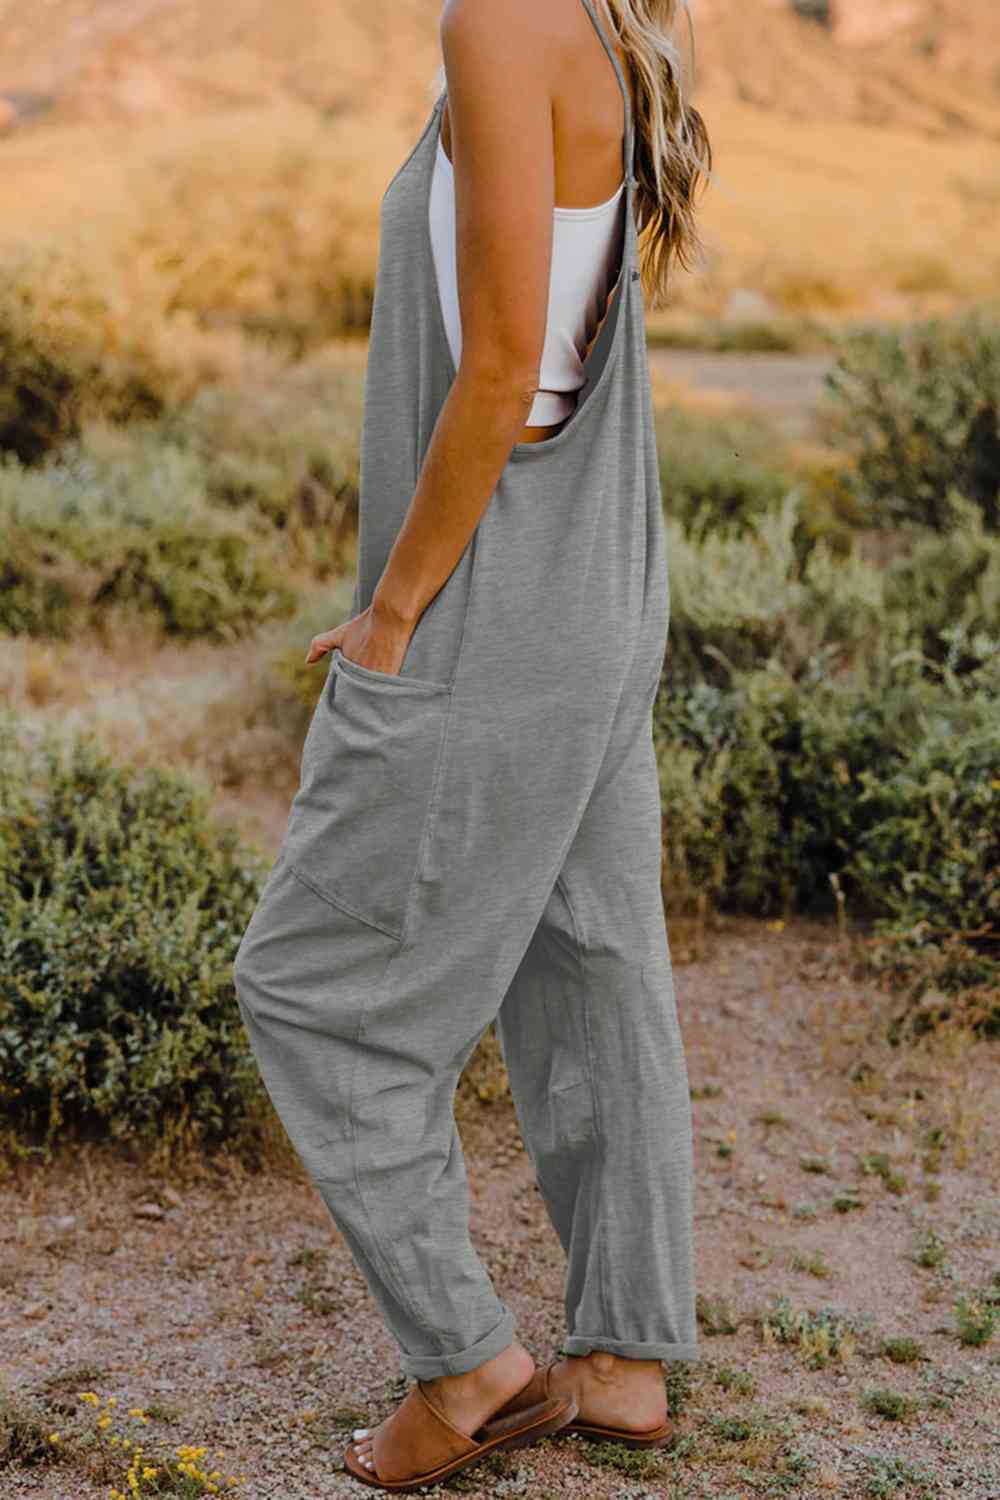 Double Take V-Neck Sleeveless Jumpsuit with Pockets for a Chic yet Casual Look